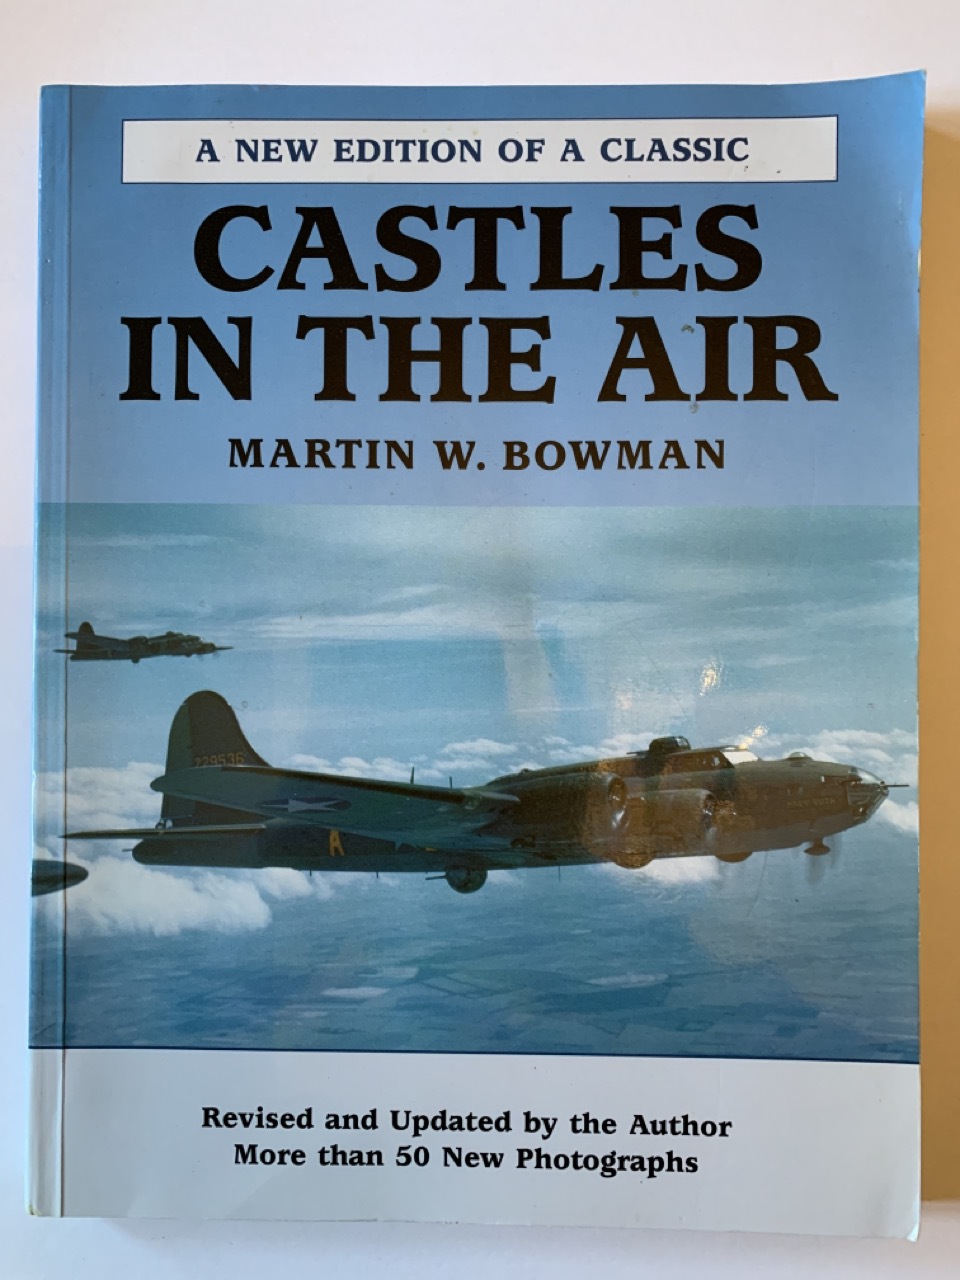 Castles in the Air: The Story of the B-17 Flying Fortress and the Men Who Flew It - Martin W. Bowman